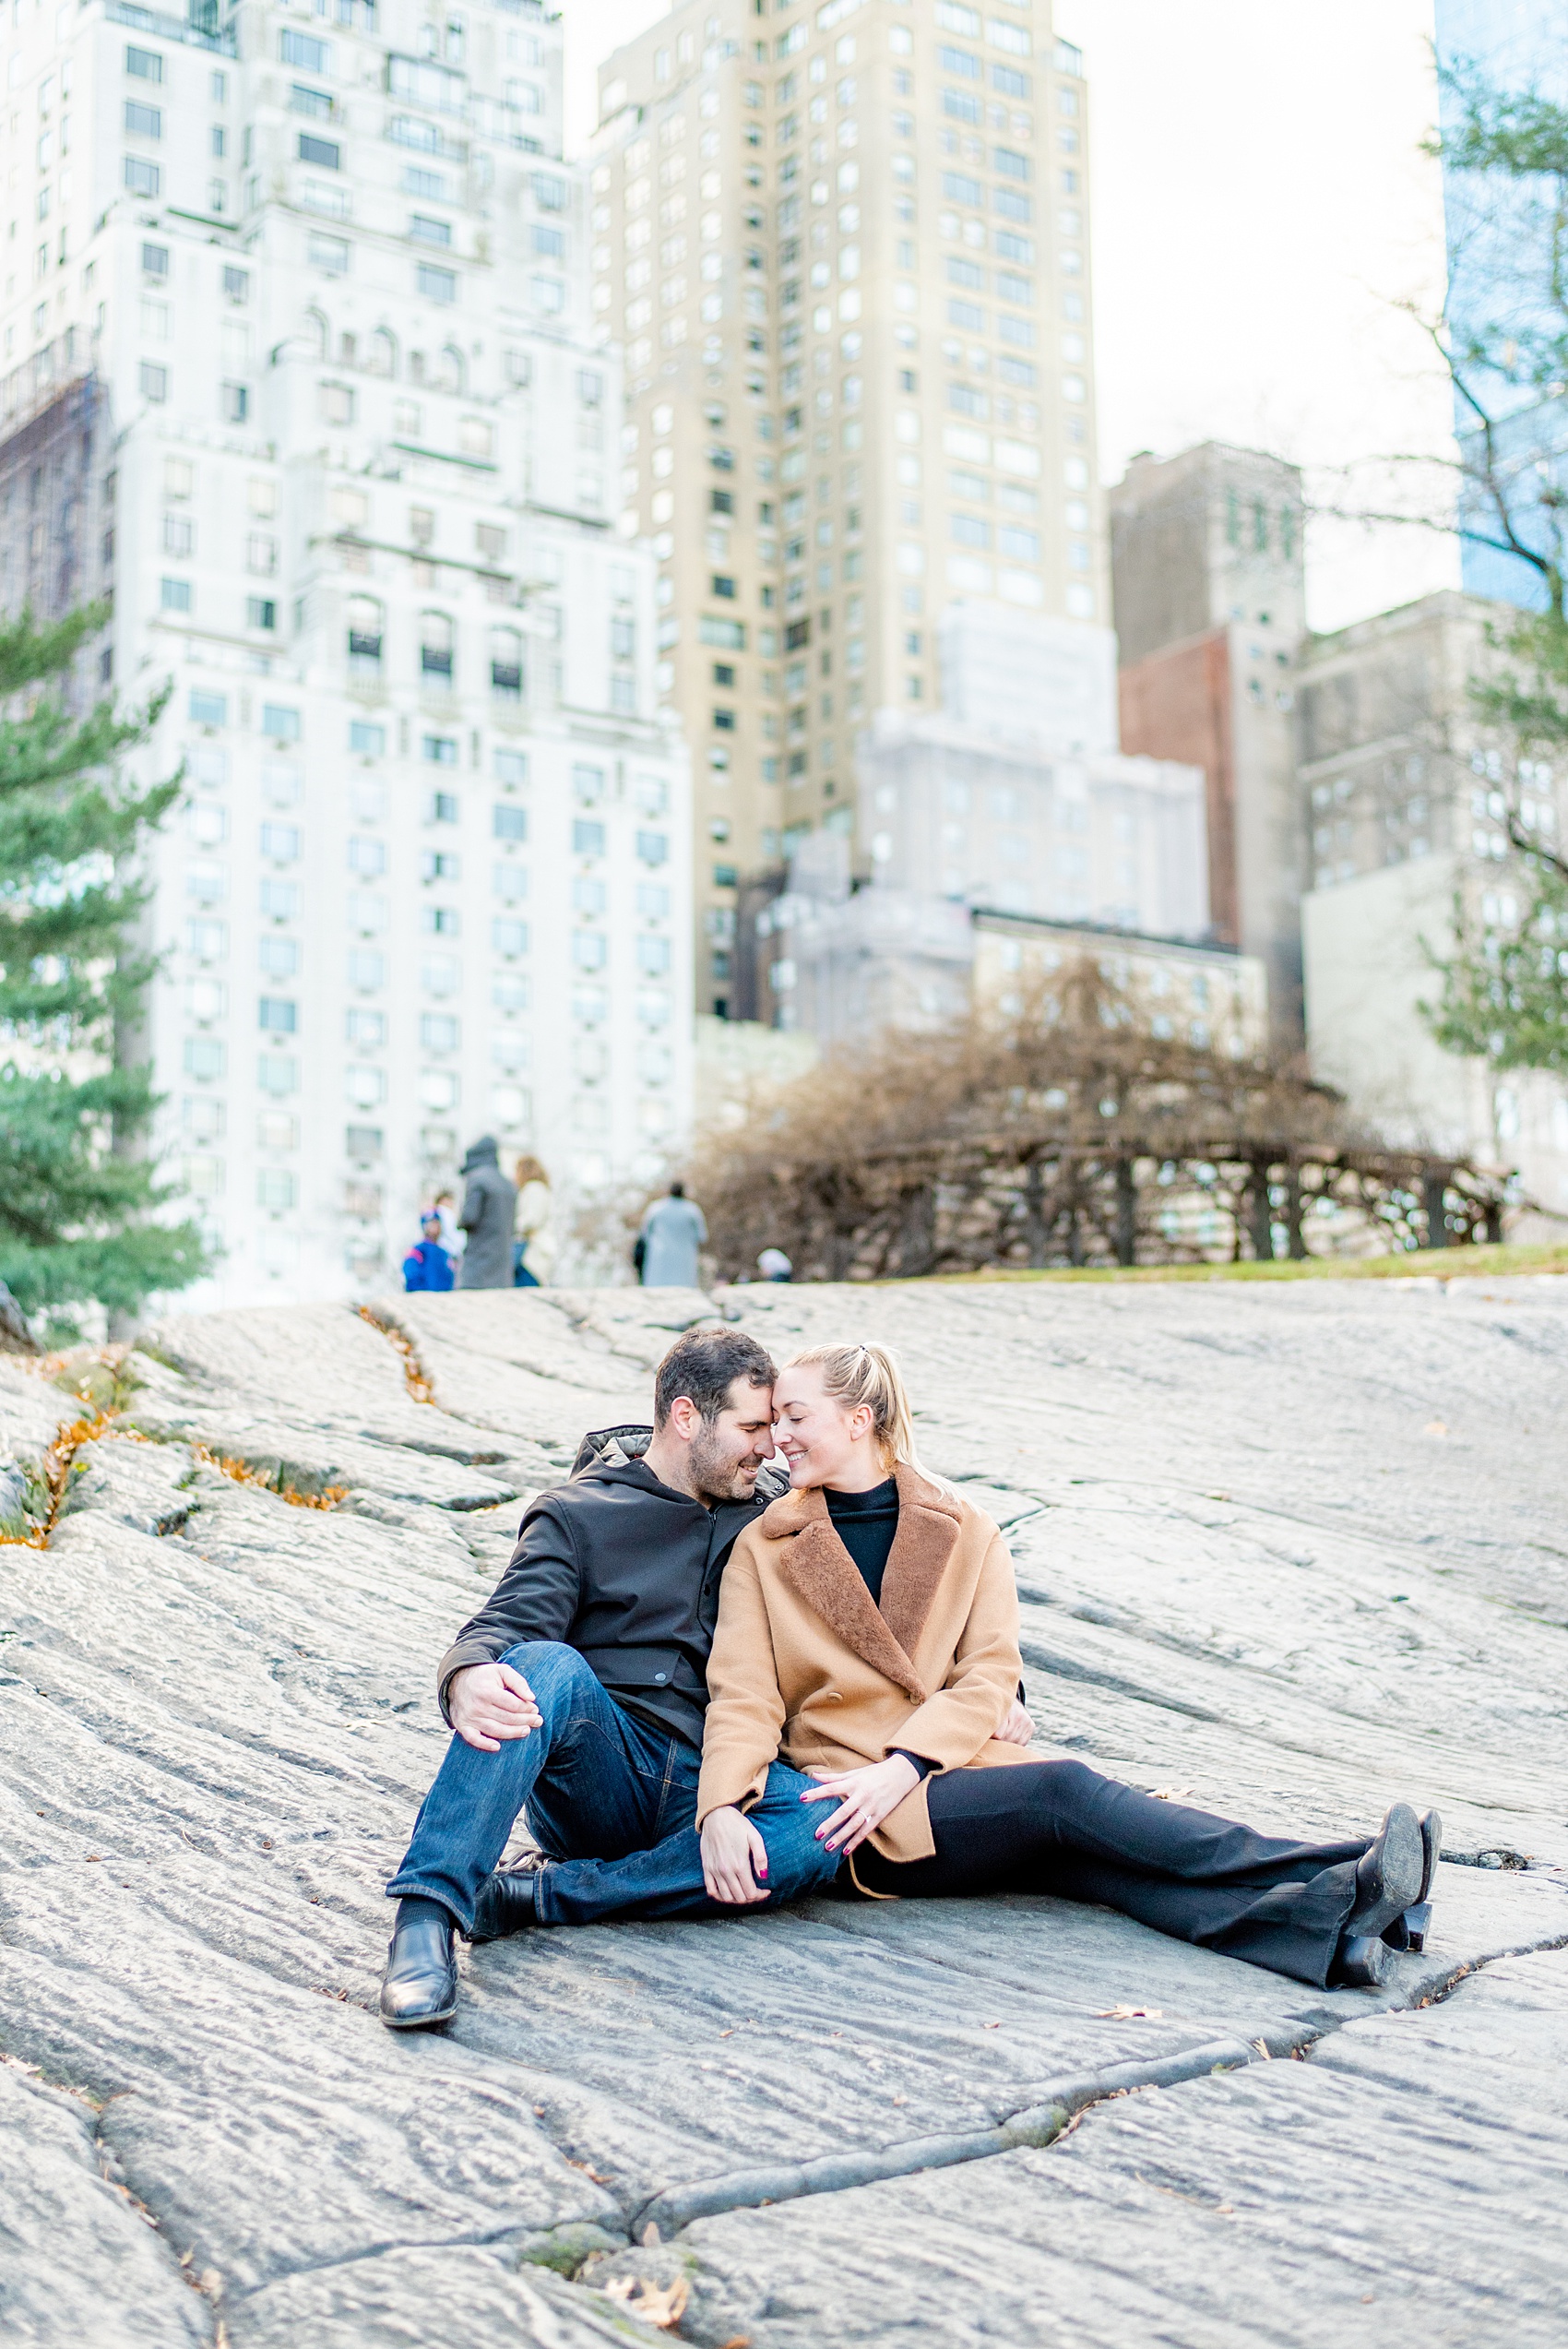 NYC proposal ideas in Central Park with photography by New York City marriage proposal photographer, Mikkel Paige Photography. Of all the cities in the world so many people dream of getting engaged in iconic, beautiful NY. Manhattan is wonderful whether winter, spring, summer, or fall and we're seasoned pros at capturing your moment. Christmas time is magic, Valentine's Day romantic and everyday between can be made memorable! Click through for more grand ideas! #MikkelPaige #NYCproposal #marryme